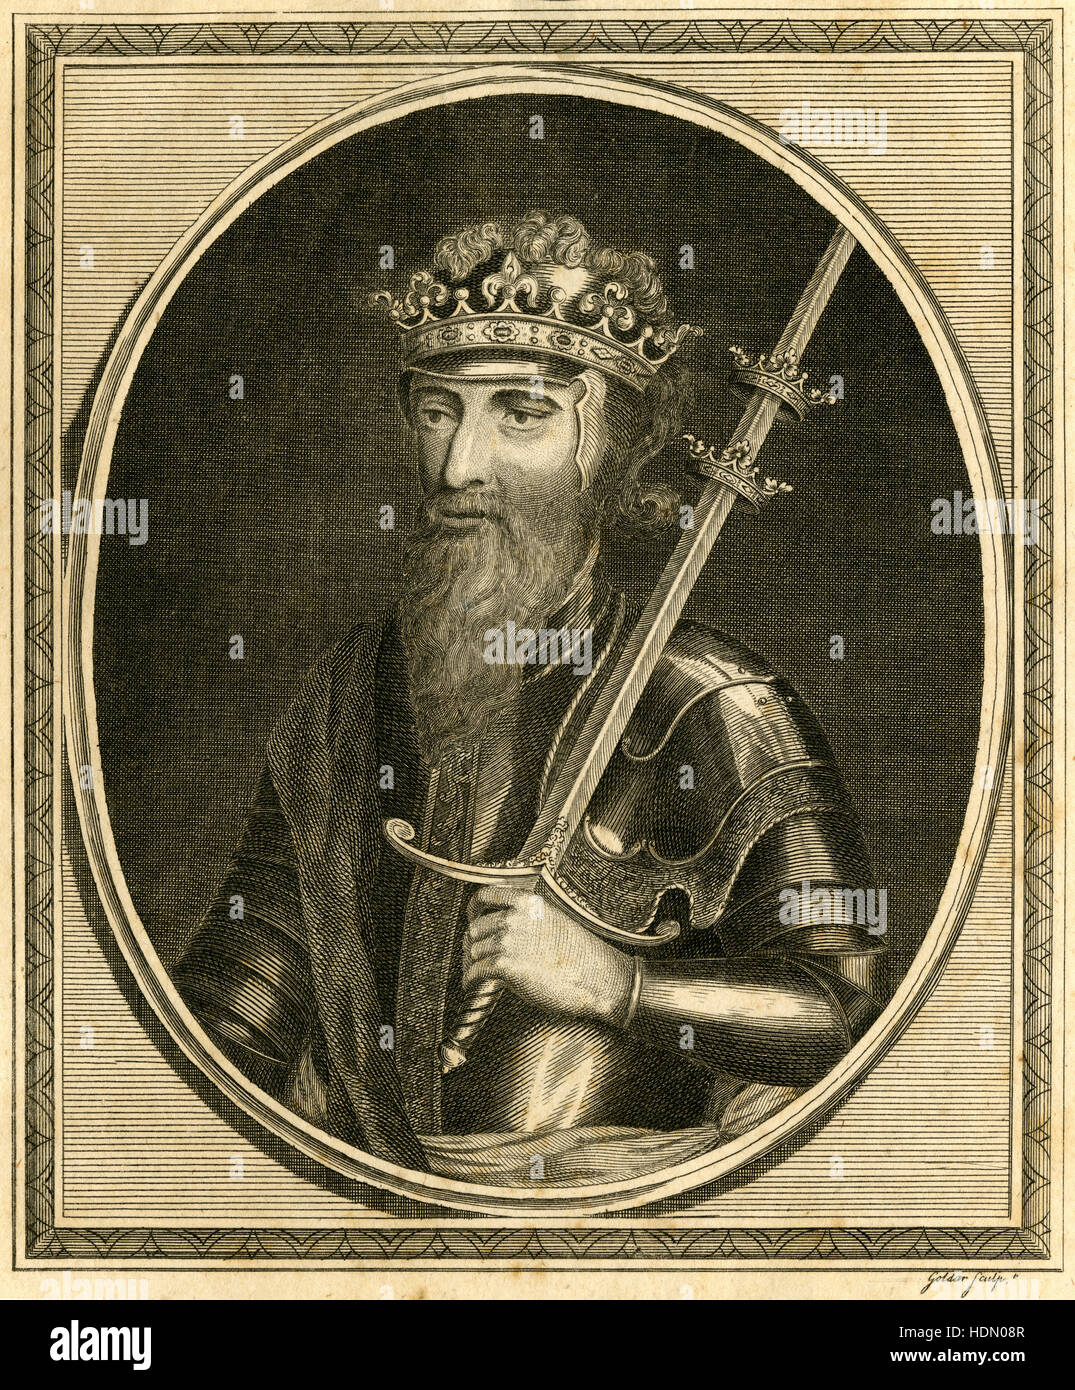 Antique 1785 engraving, King Edward III. Edward III (1312-1377) was King of England from 25 January 1327 until his death; he is noted for his military success and for restoring royal authority after the disastrous and unorthodox reign of his father, Edward II. SOURCE: ORIGINAL ENGRAVING. Stock Photo